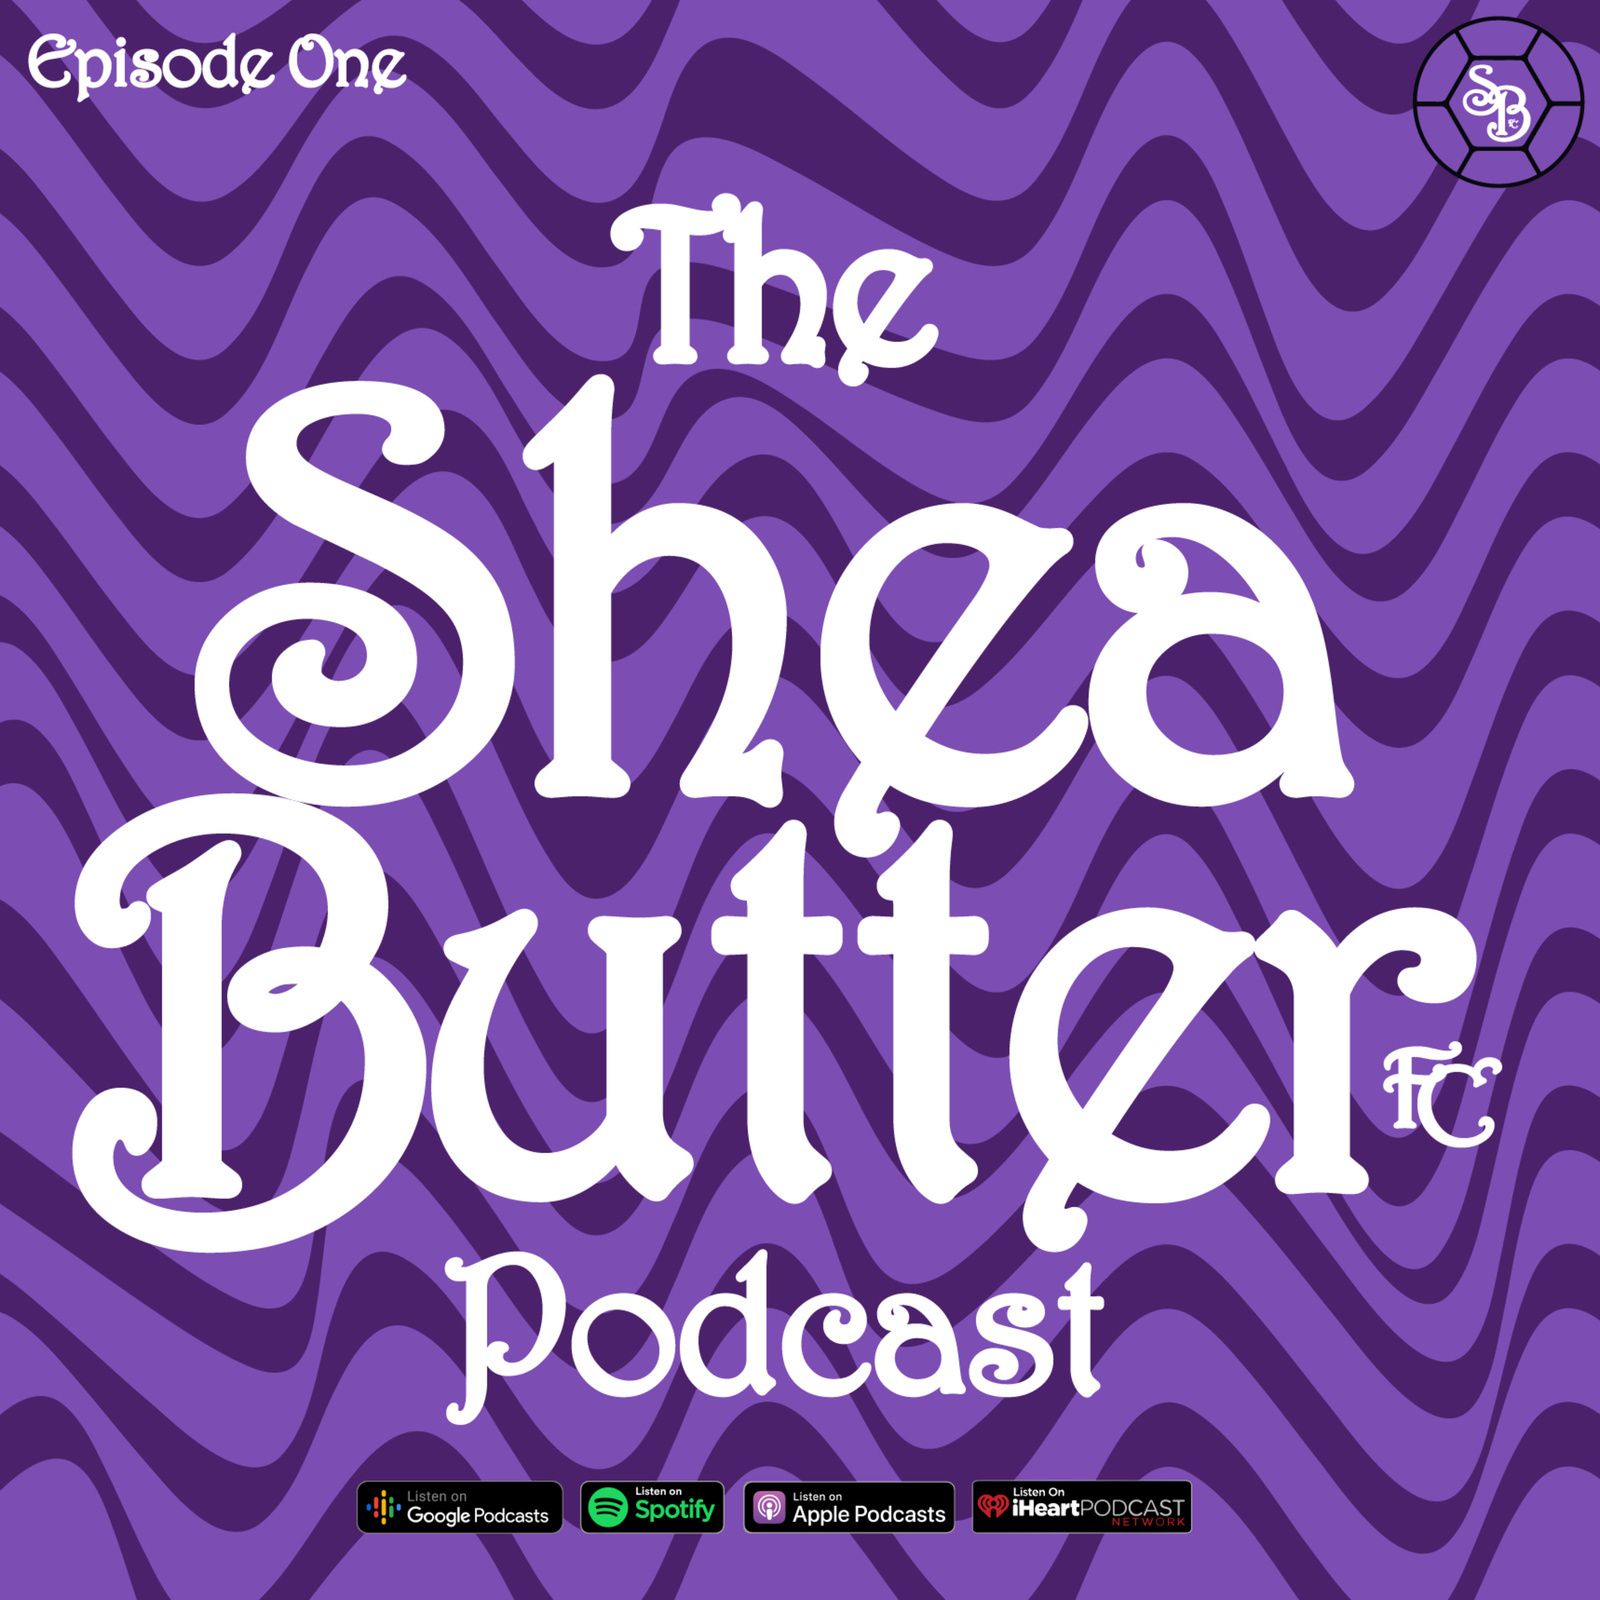 FTC Presents Shea Butter FC Podcast, Episode One